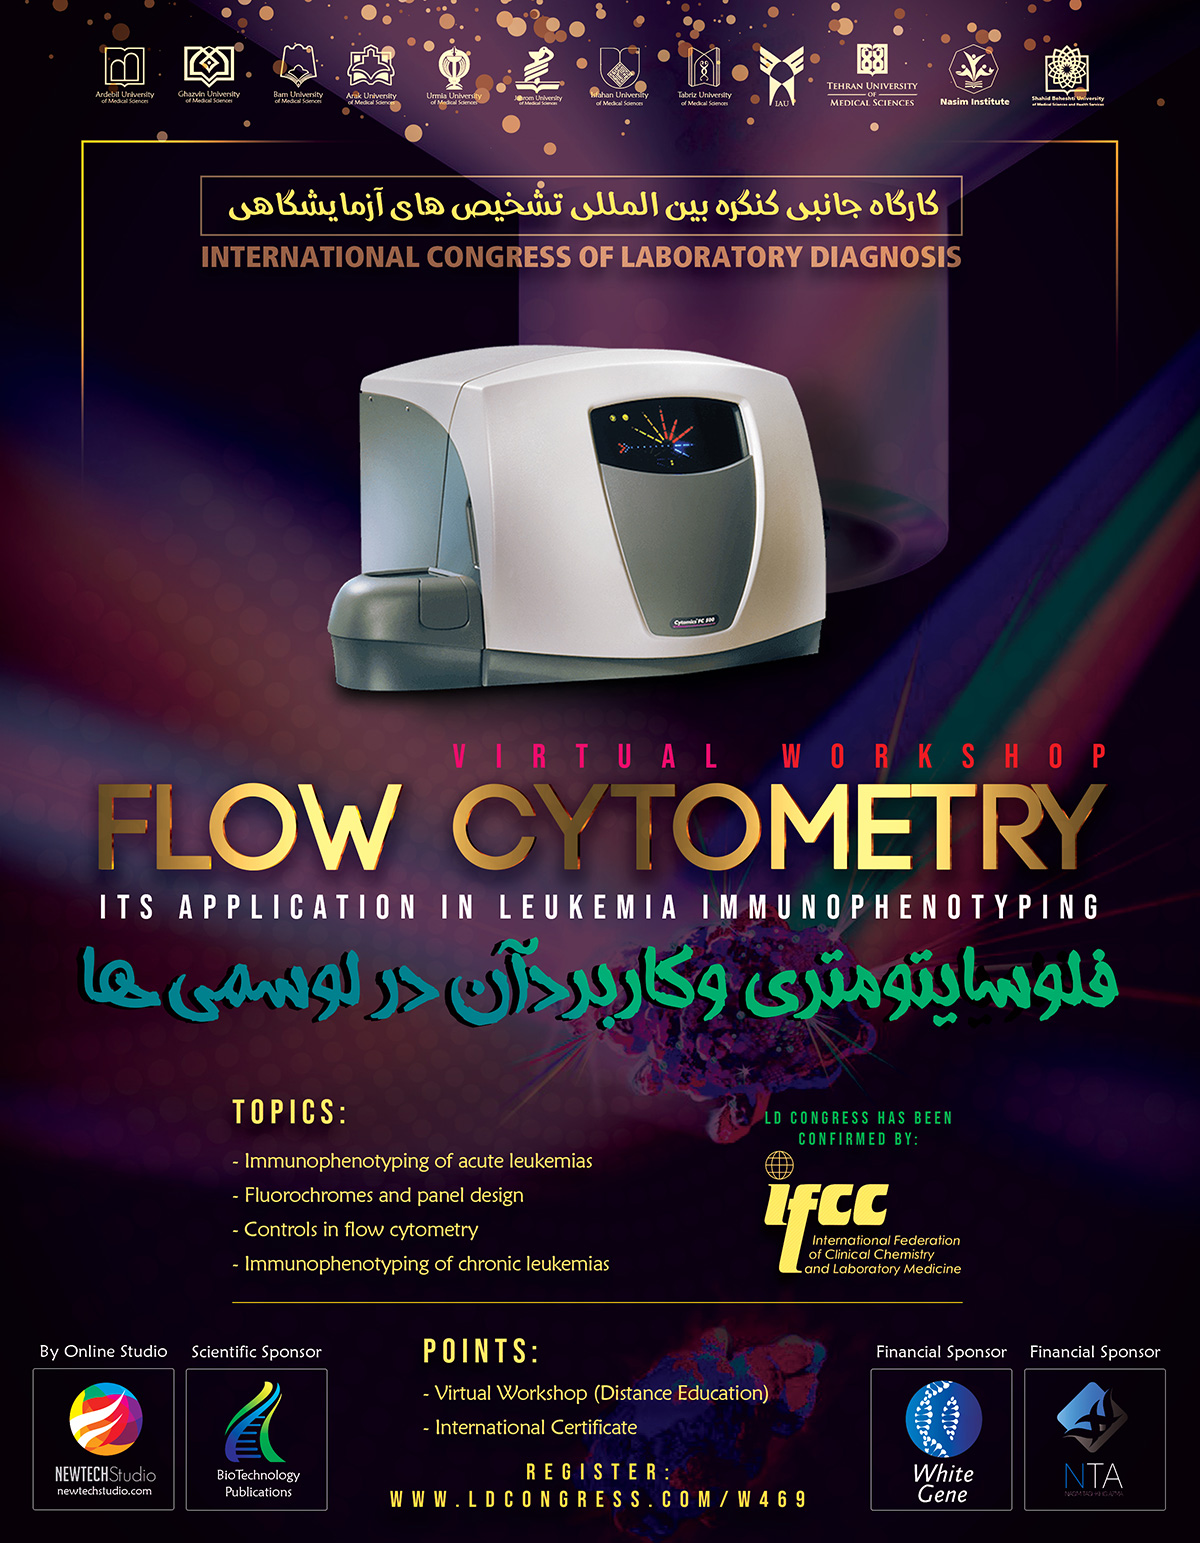 Flow cytometry and immunophenotyping of leukemia